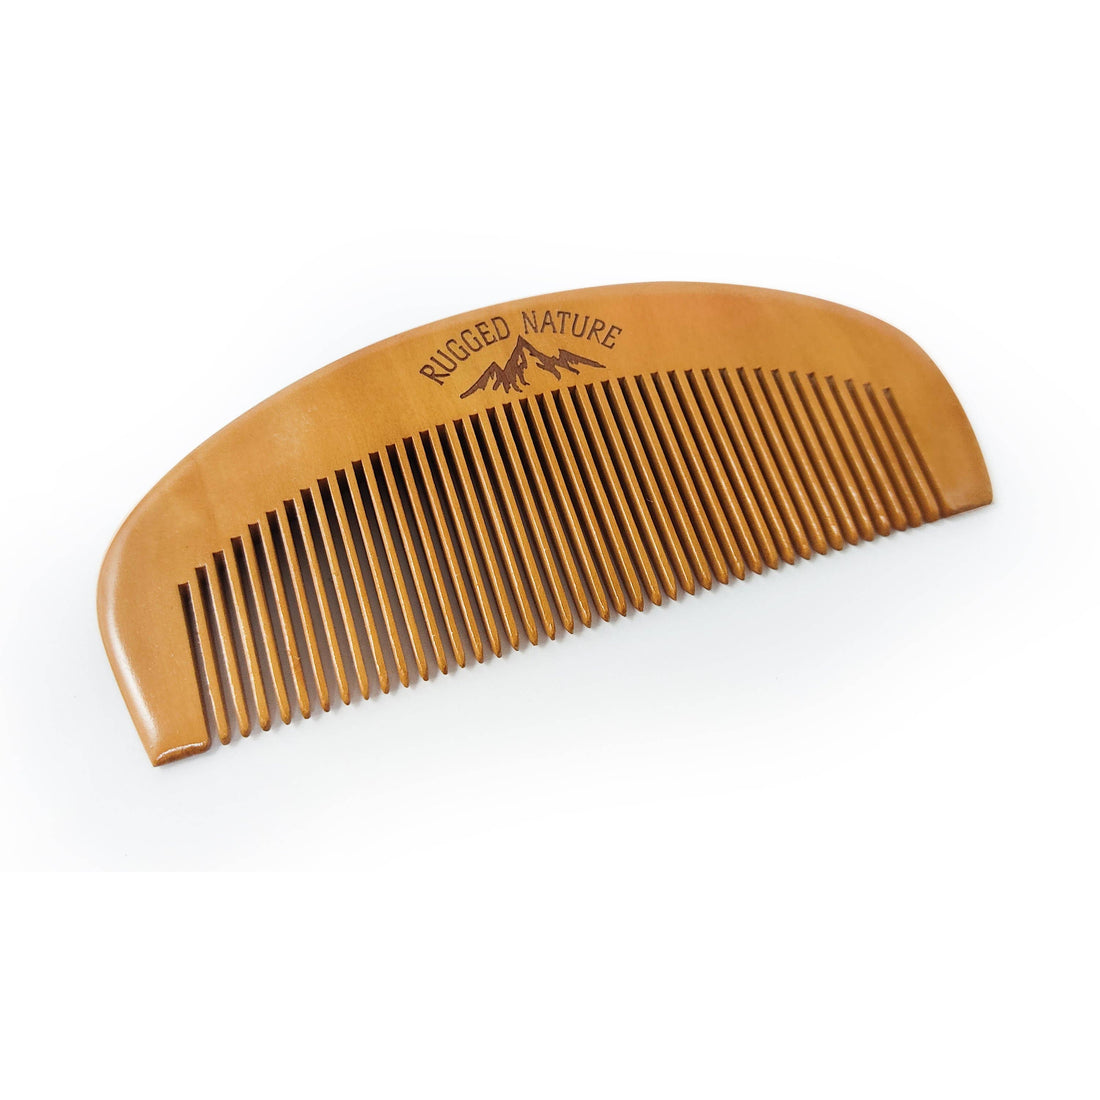 Large Wooden Comb